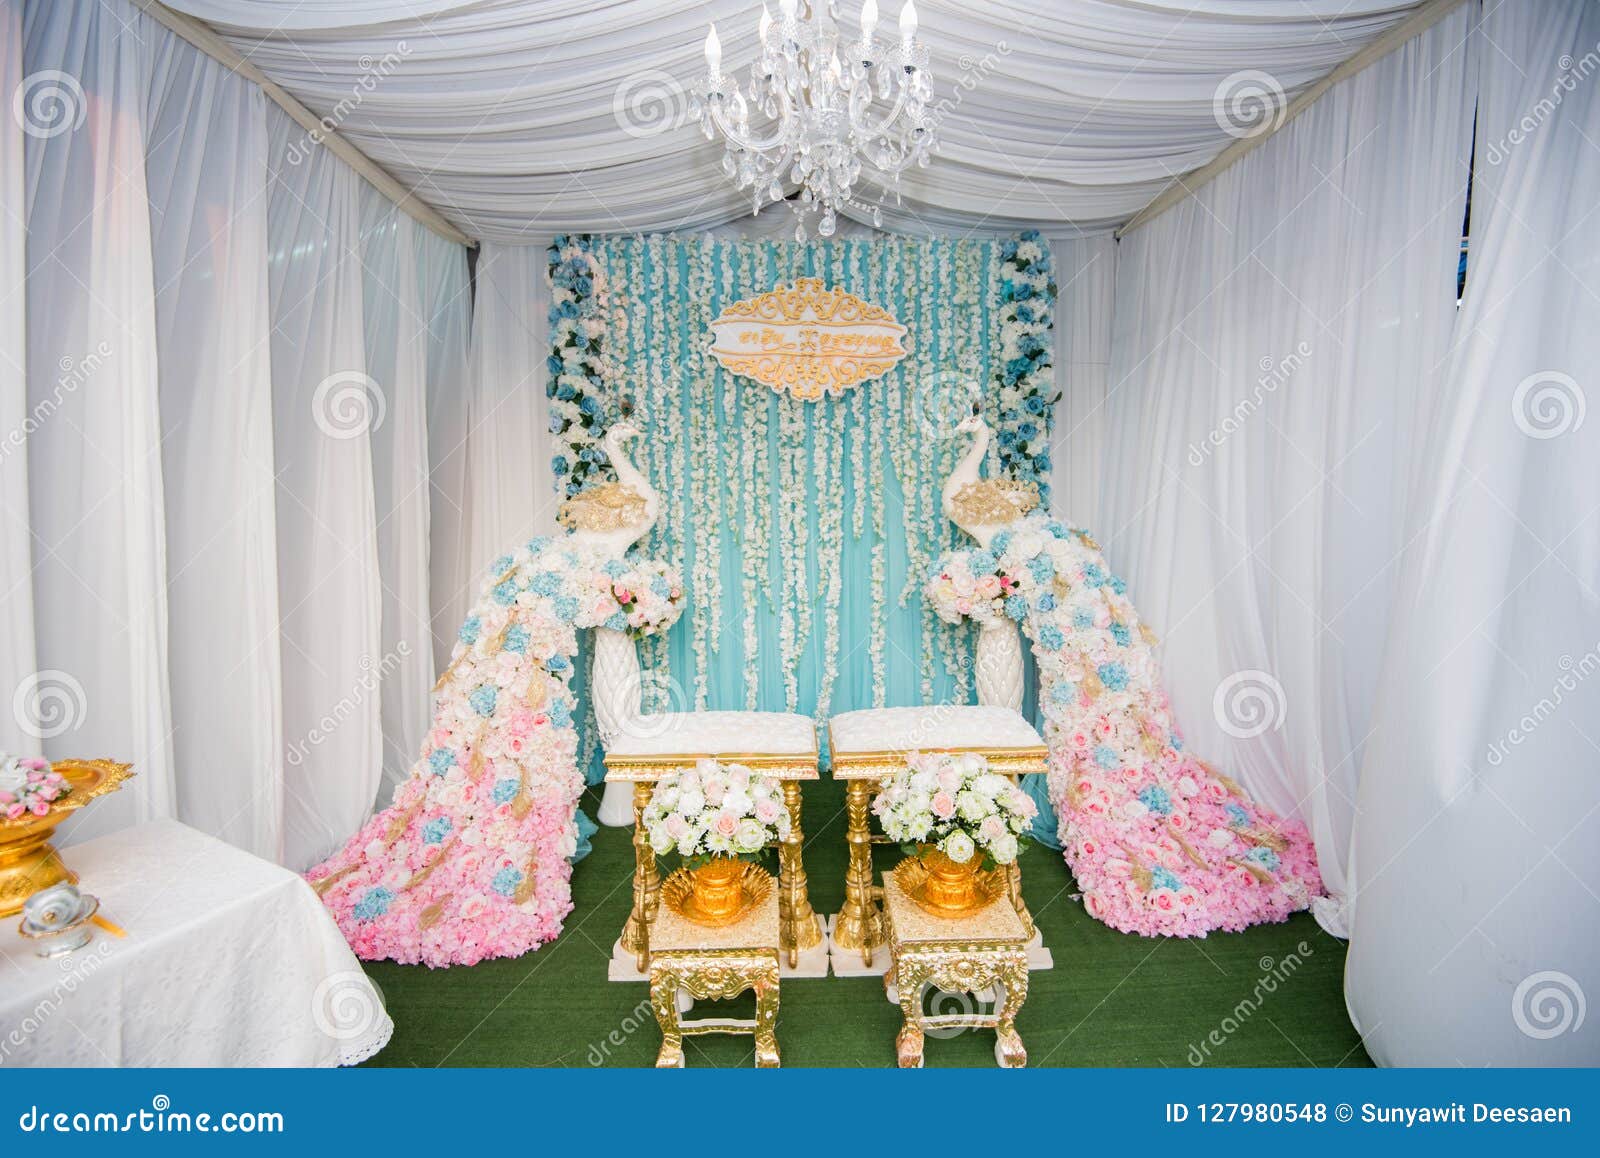 3,480 Wedding Stage Decoration Stock Photos - Free & Royalty-Free Stock  Photos from Dreamstime